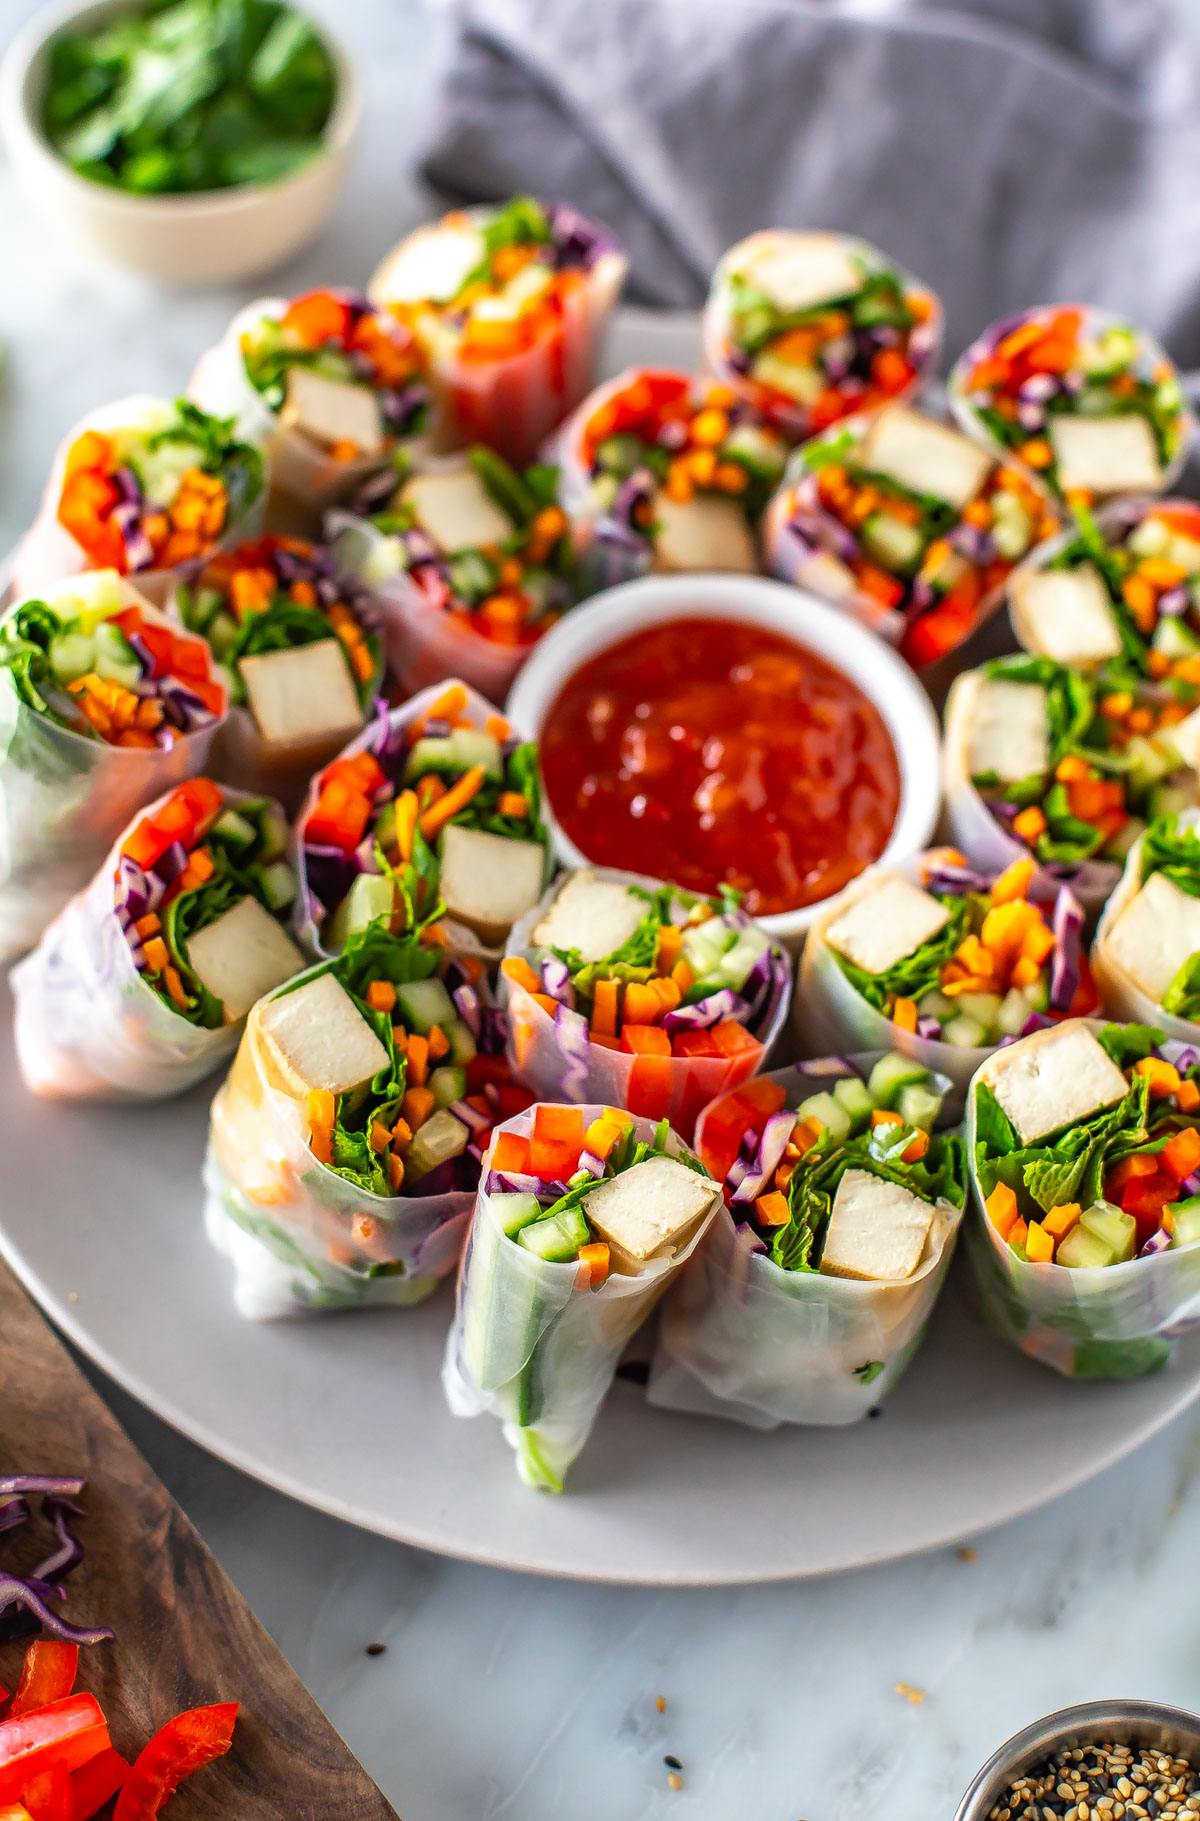 A plate of summer rolls with a bowl of sweet chili sauce in the middle.